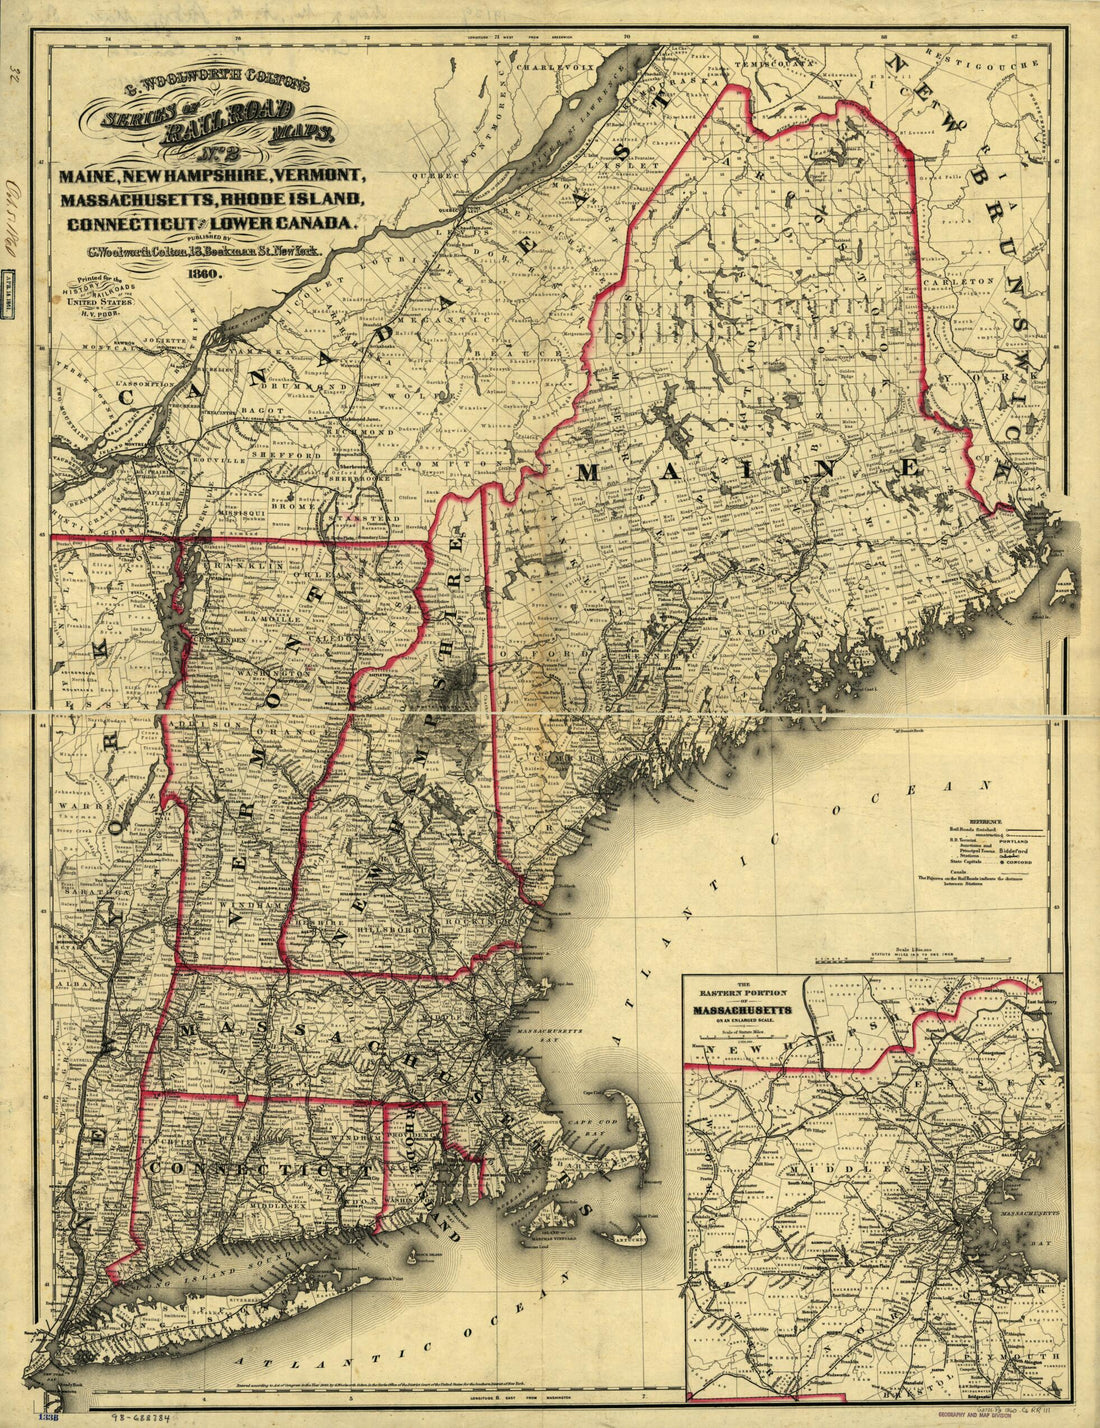 This old map of Maine, New Hampshire, Vermont, Massachusetts, Rhode Island, Connecticut and Lower Canada, from 1860 was created by G. Woolworth (George Woolworth) Colton in 1860